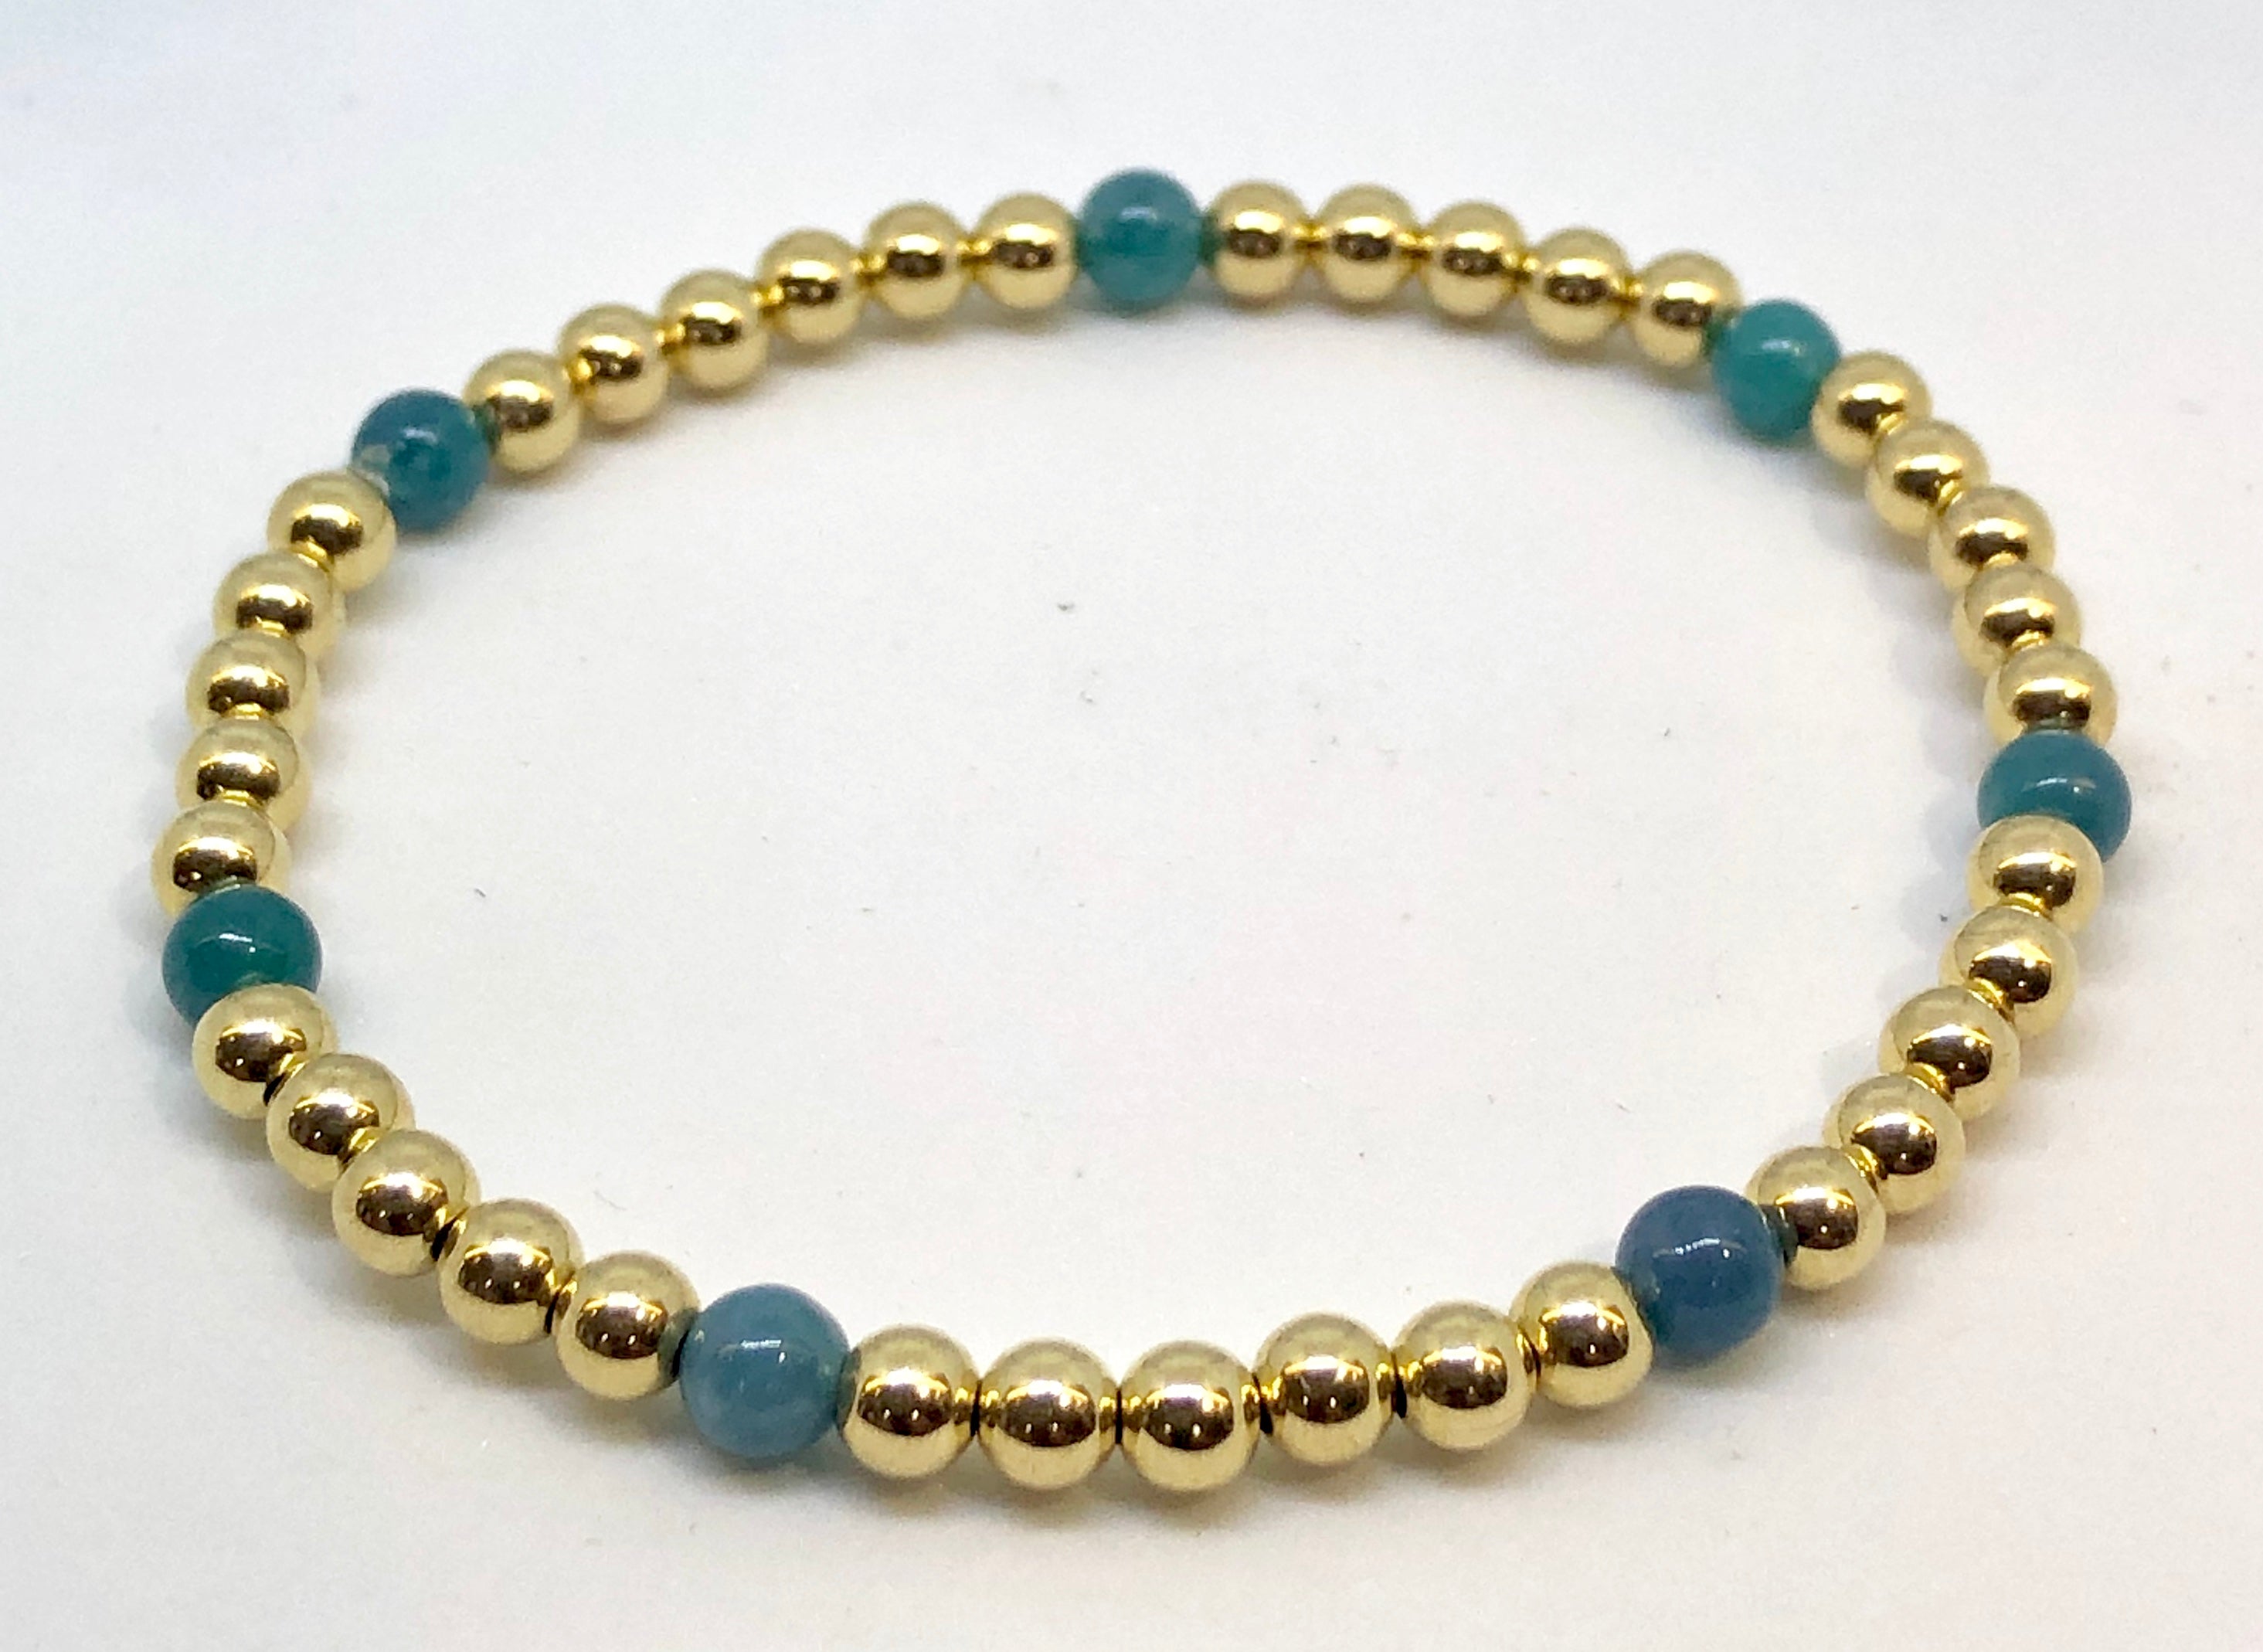 4mm 14kt Gold Filled Bead Bracelet with 7 4mm Green Teal Jade Beads